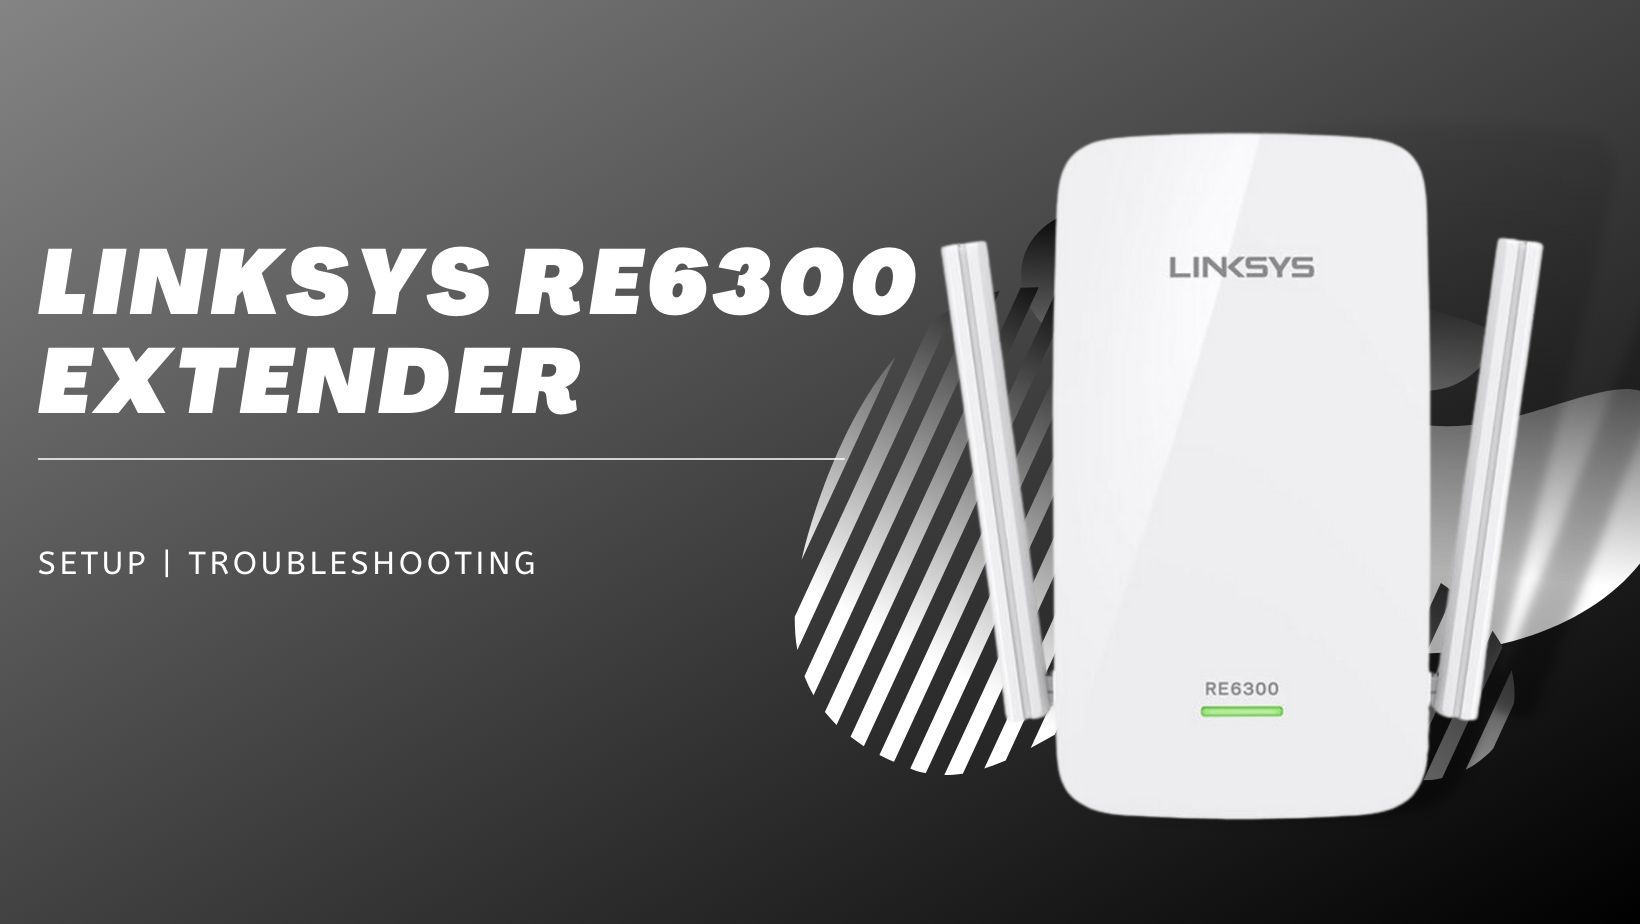 How To Setup Linksys Re6300 Extender?